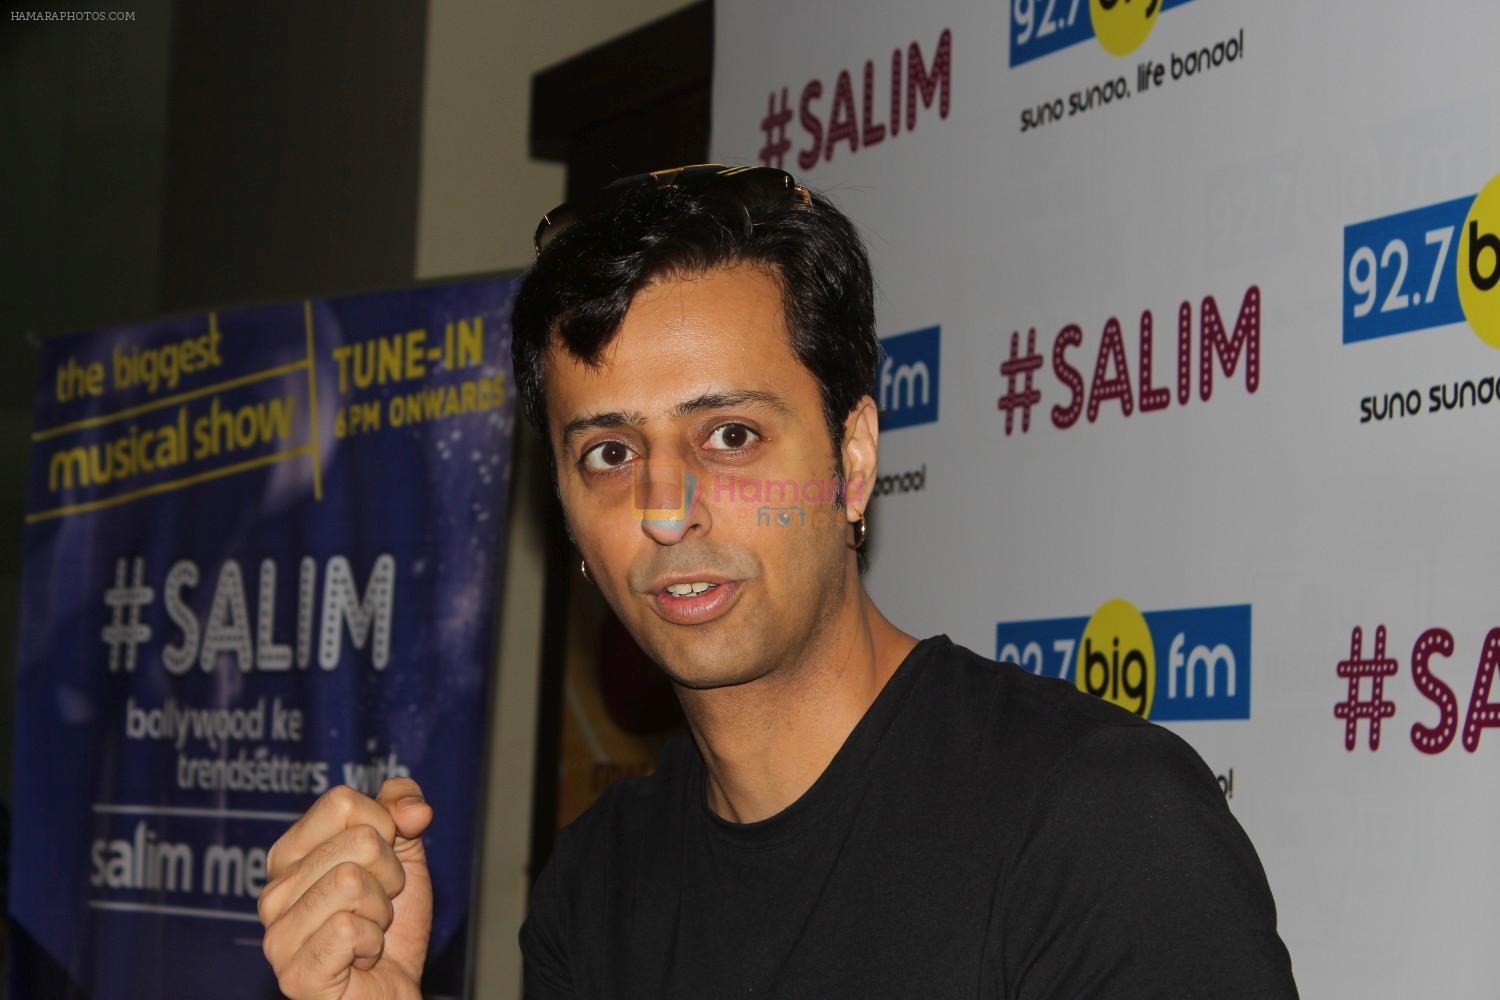 Salim Merchant at the Launch Of New Show Salim on 17th May 2017